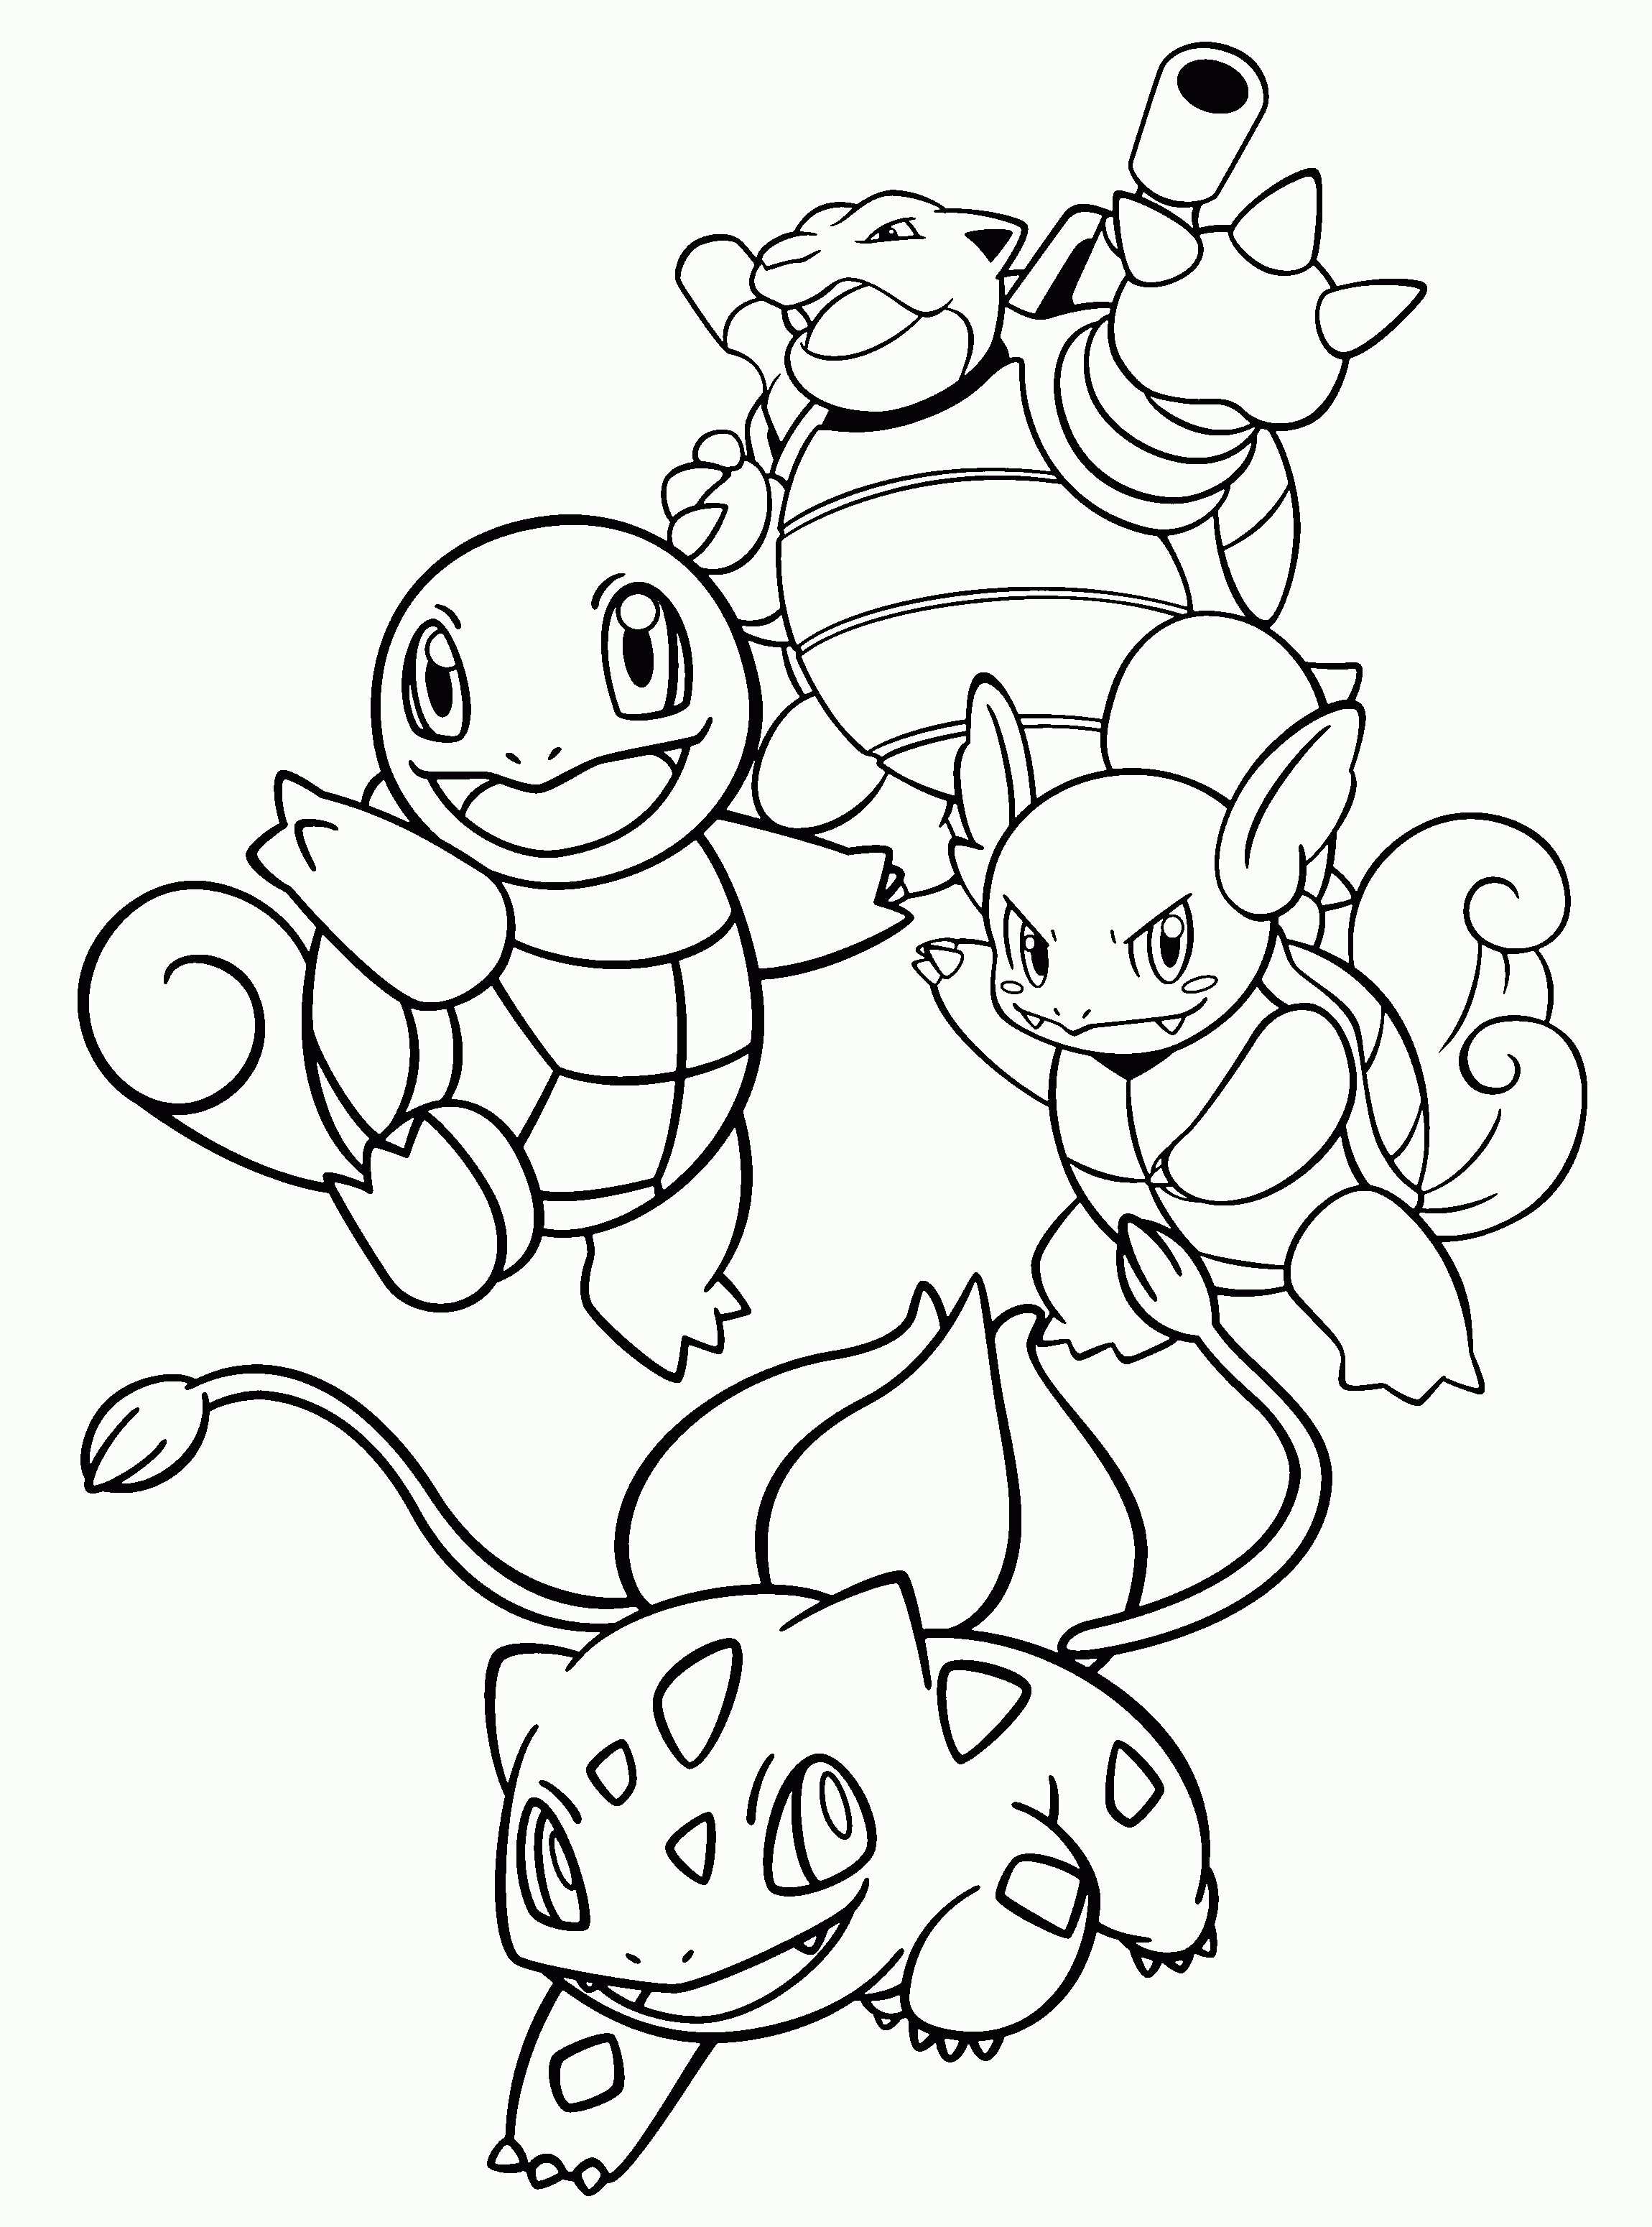 Kleurplaat Pokemon With Images Coloring Books Coloring Pages